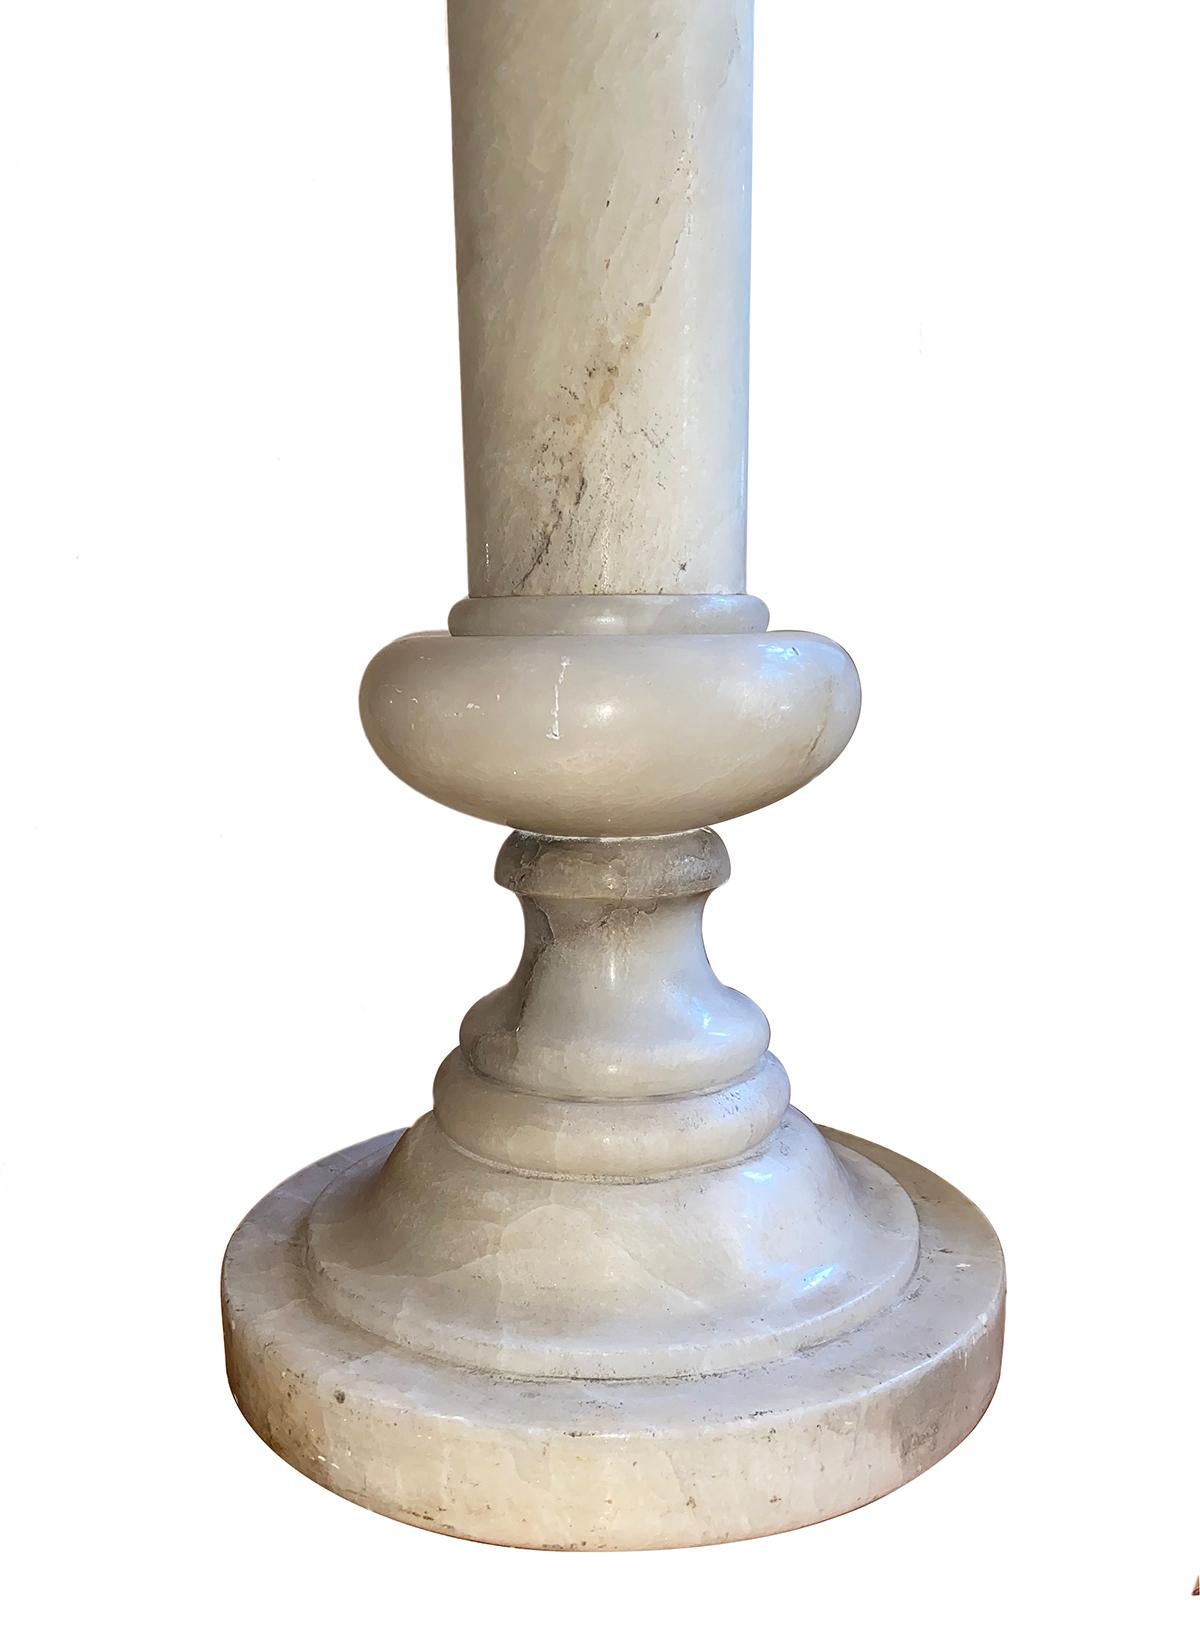 A pair of circa 1920s of Italian carved alabaster pedestals. Sold as pair.

Measurements:
Height: 41